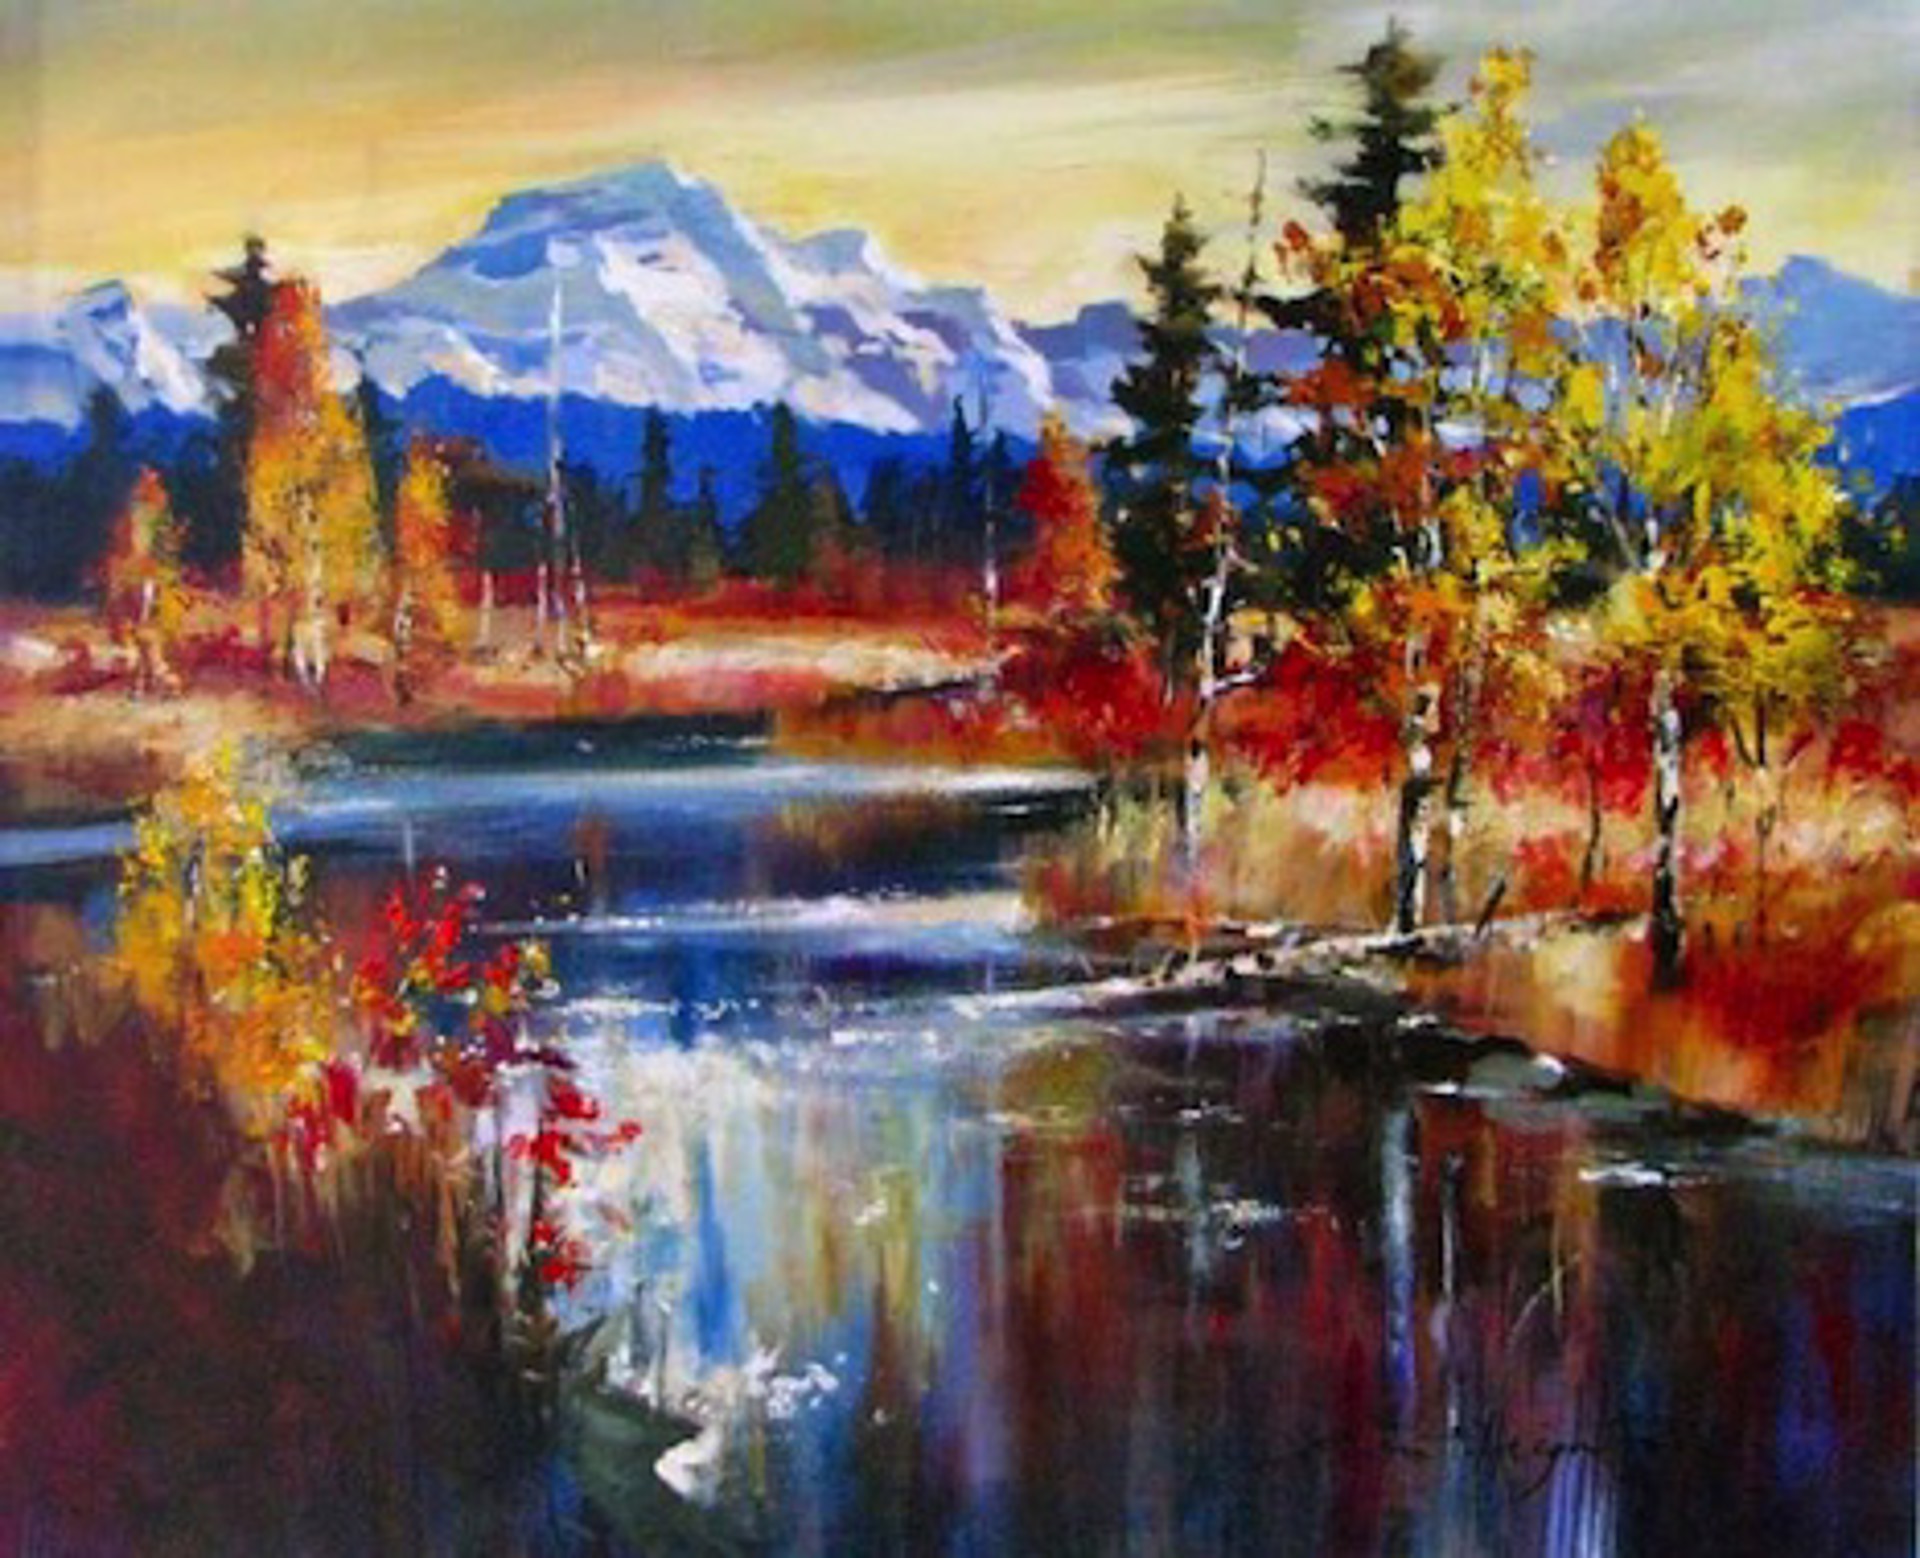 Aspen on the River by Brent Heighton